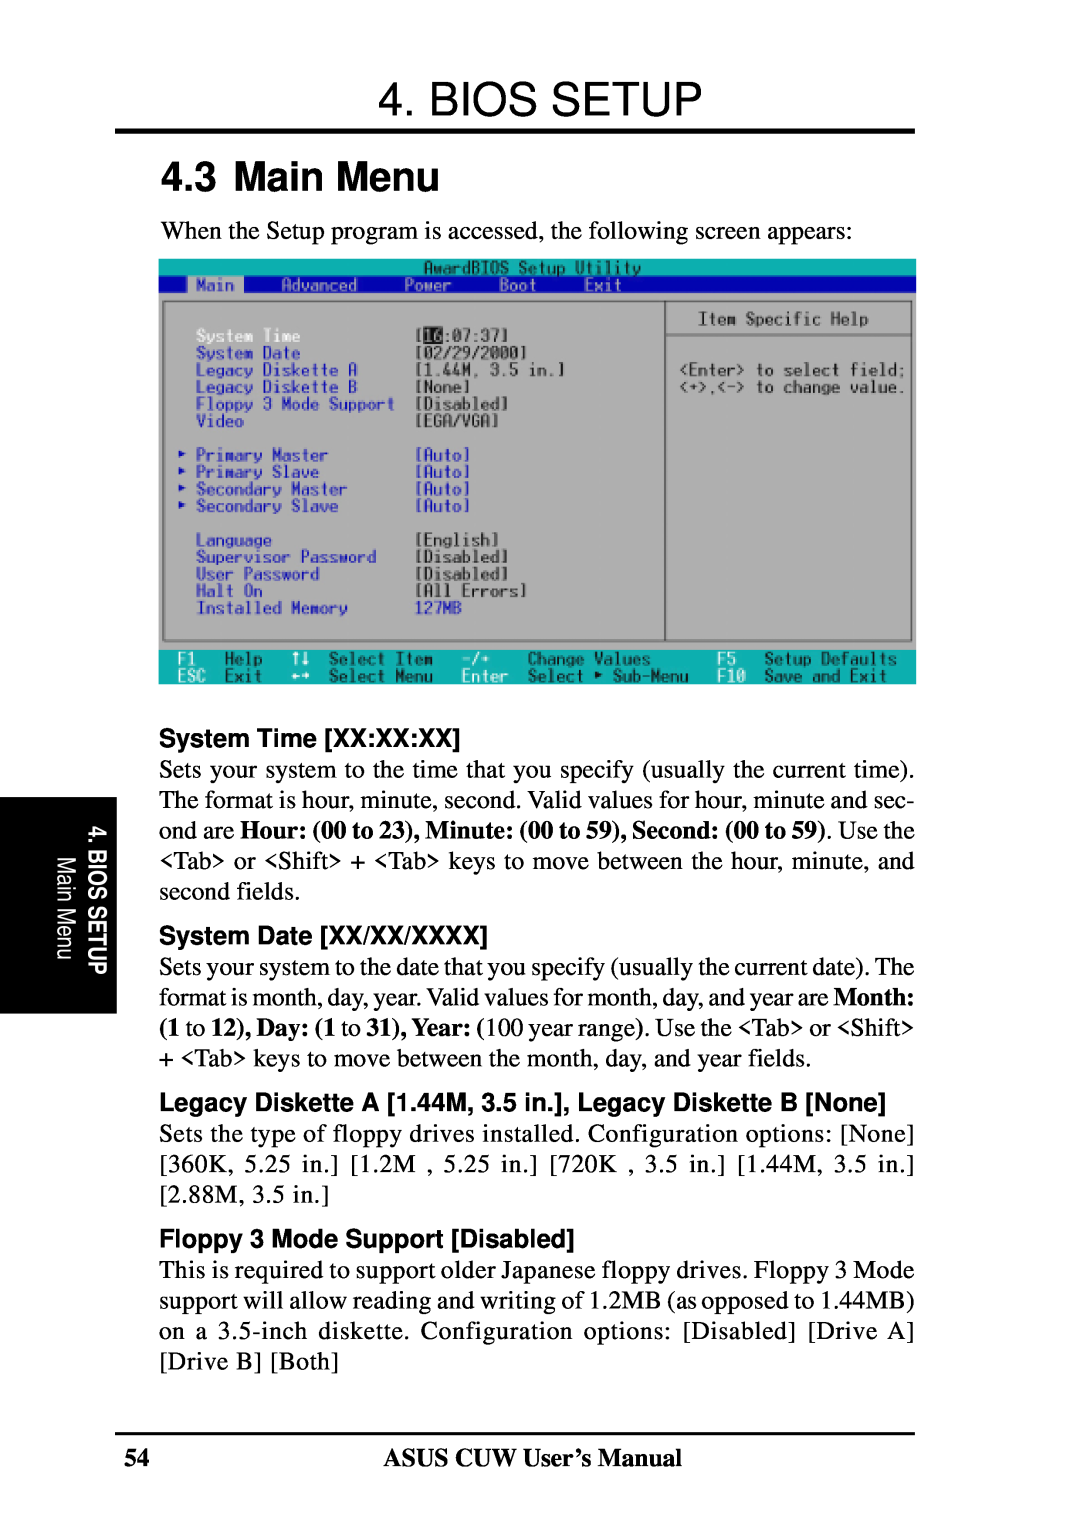 Asus 810 Main Menu, System Time, System Date XX/XX/XXXX, Legacy Diskette A 1.44M, 3.5 in., Legacy Diskette B None 